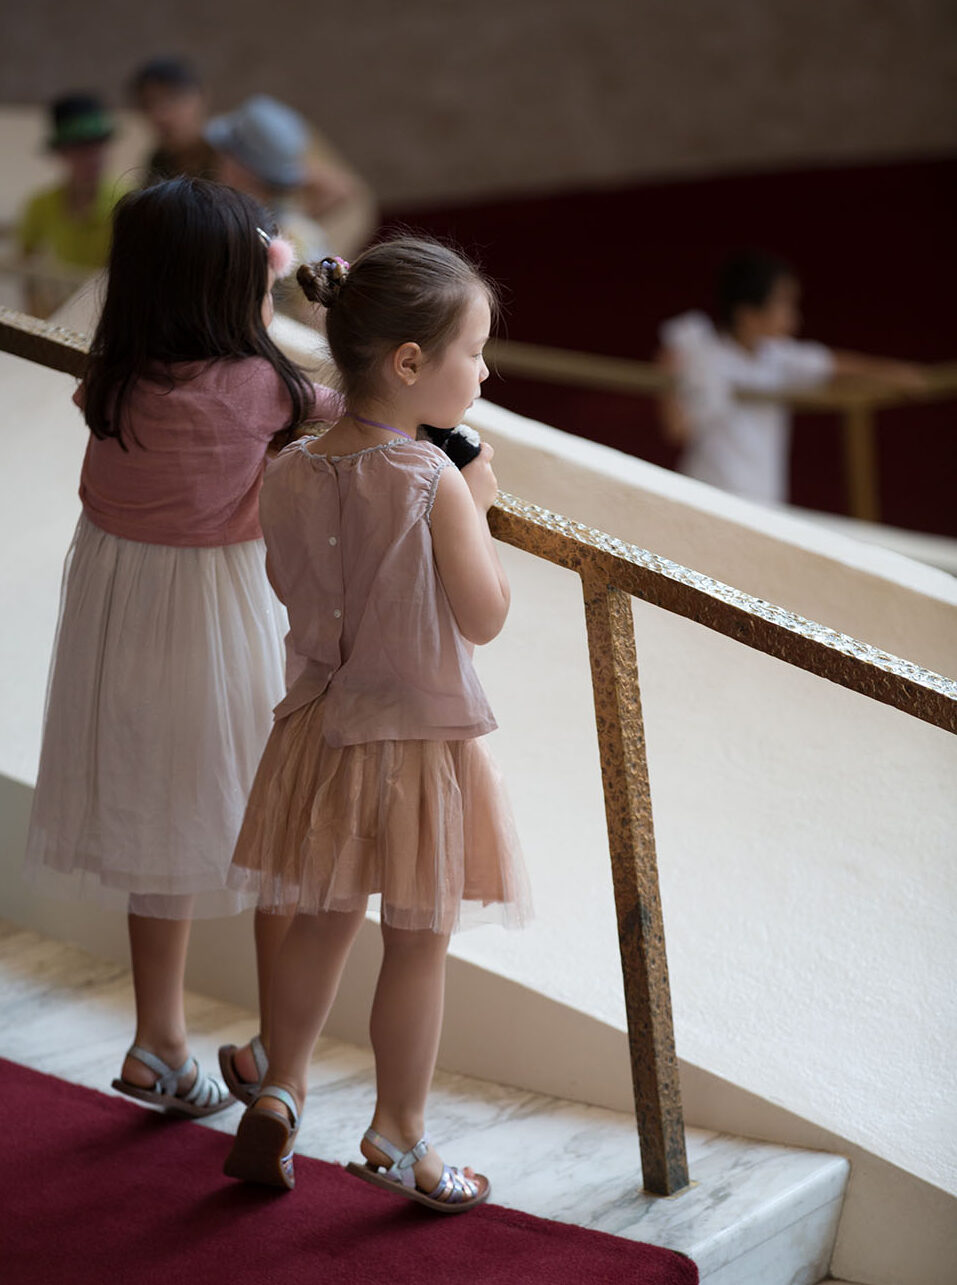 Young fans attend ABTKids at the Metropolitan Opera House. Photo: Rosalie O’Connor.